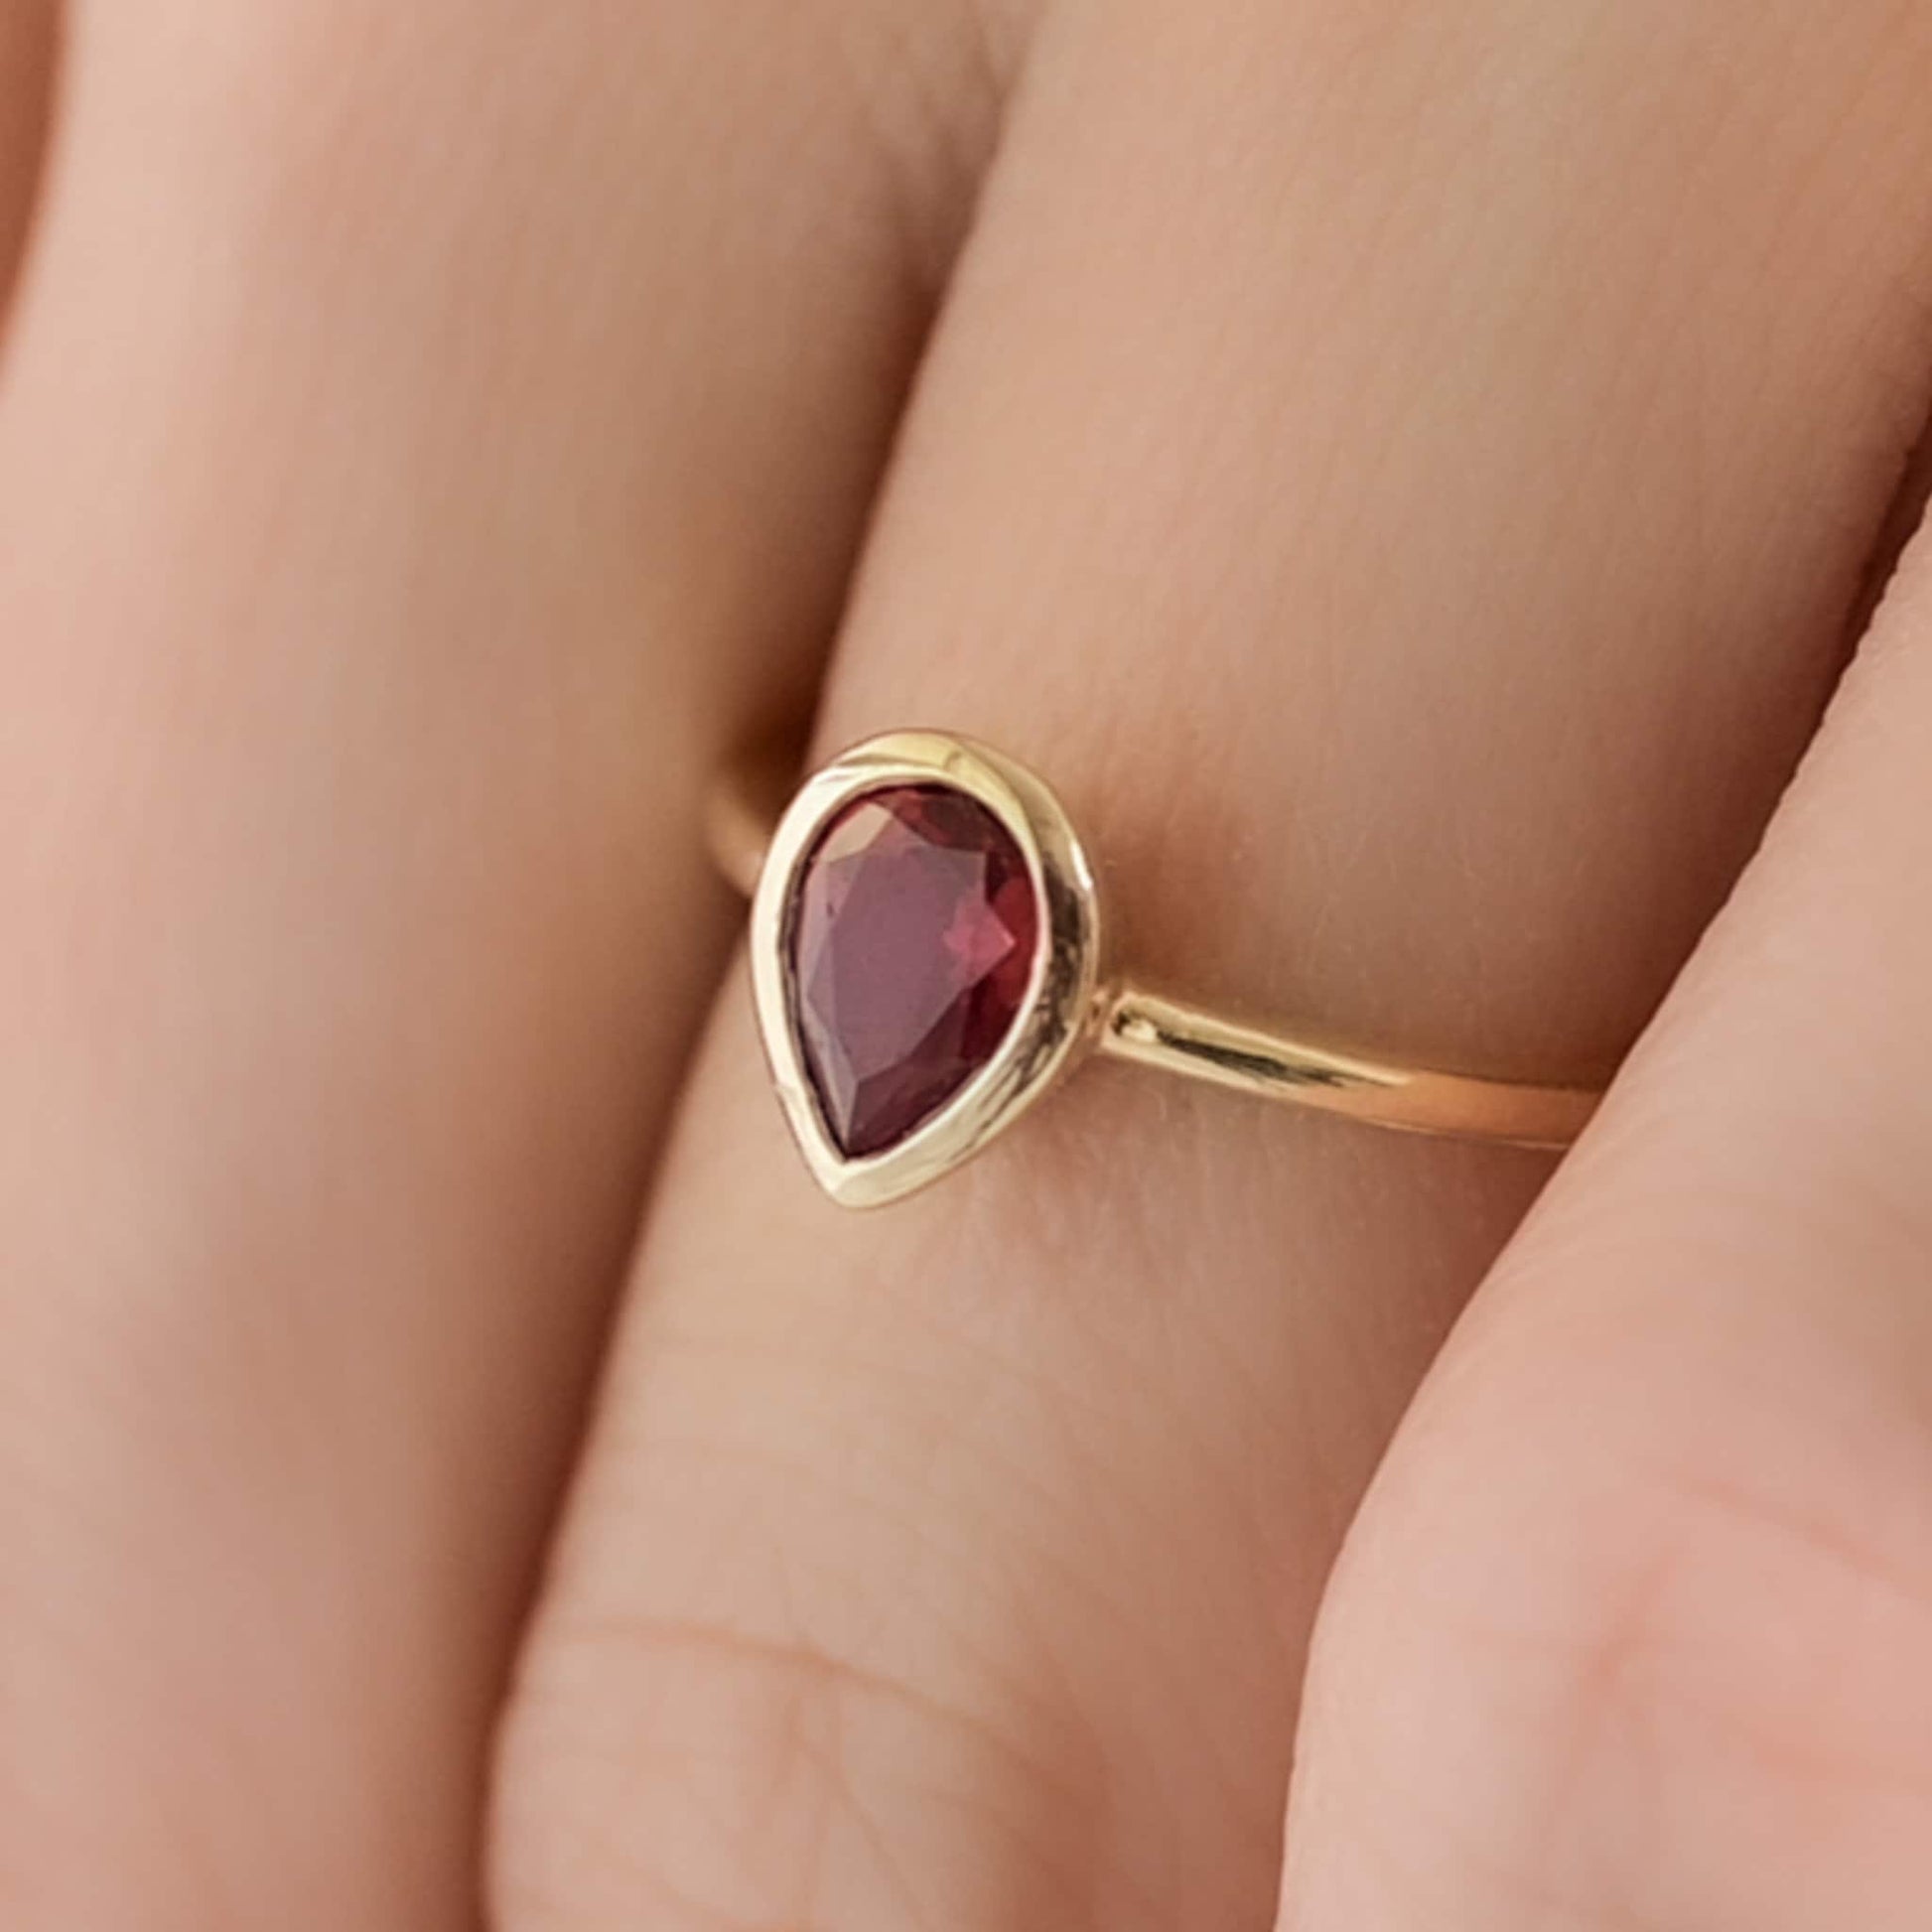 Ruby Pear Shaped Bezel Set Engagement or Statement Ring in Solid Gold